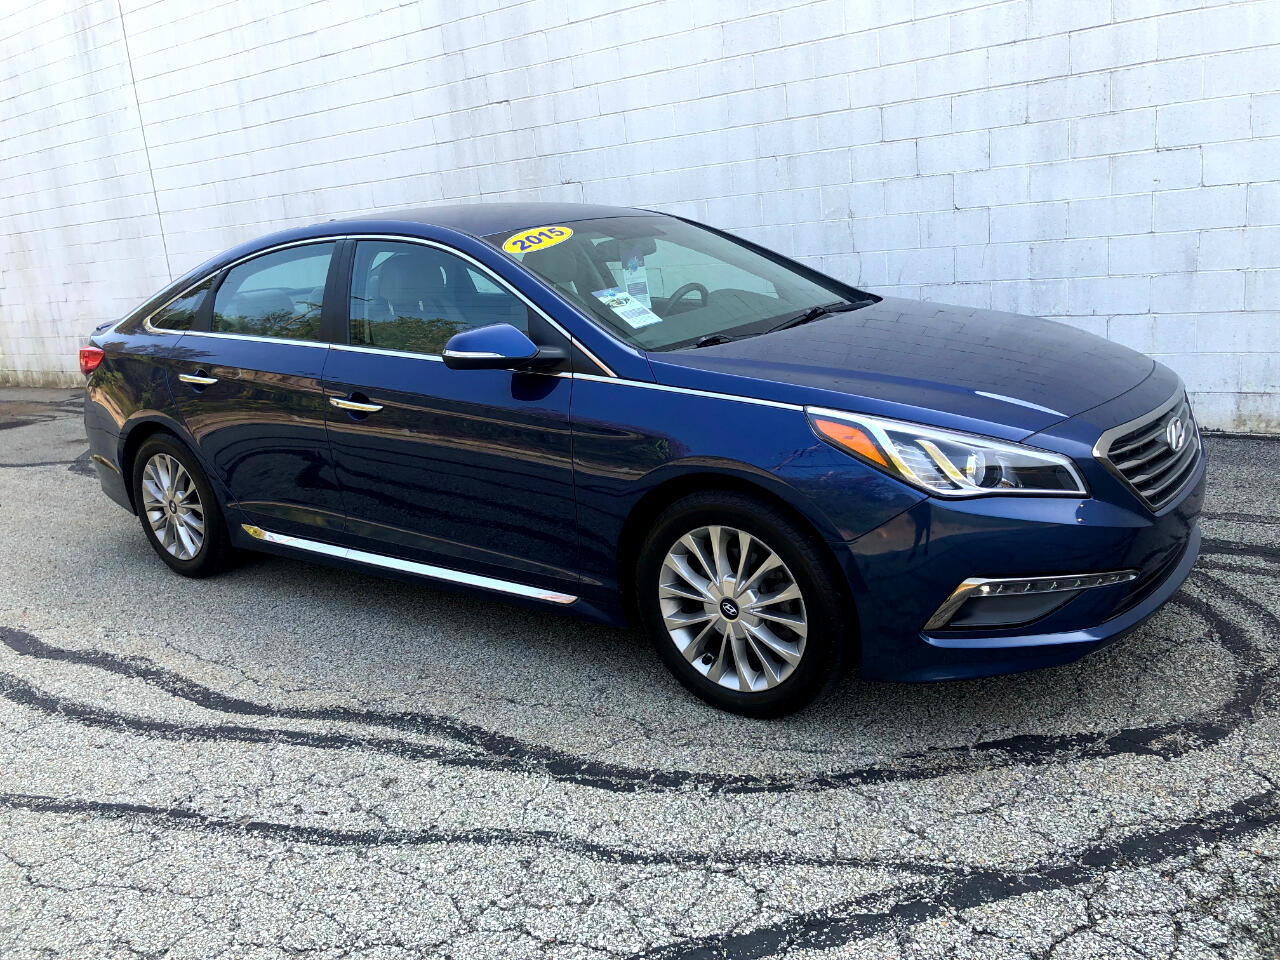 Used 2015 Hyundai Sonata Limited for Sale in Murrysville PA 15668 ...